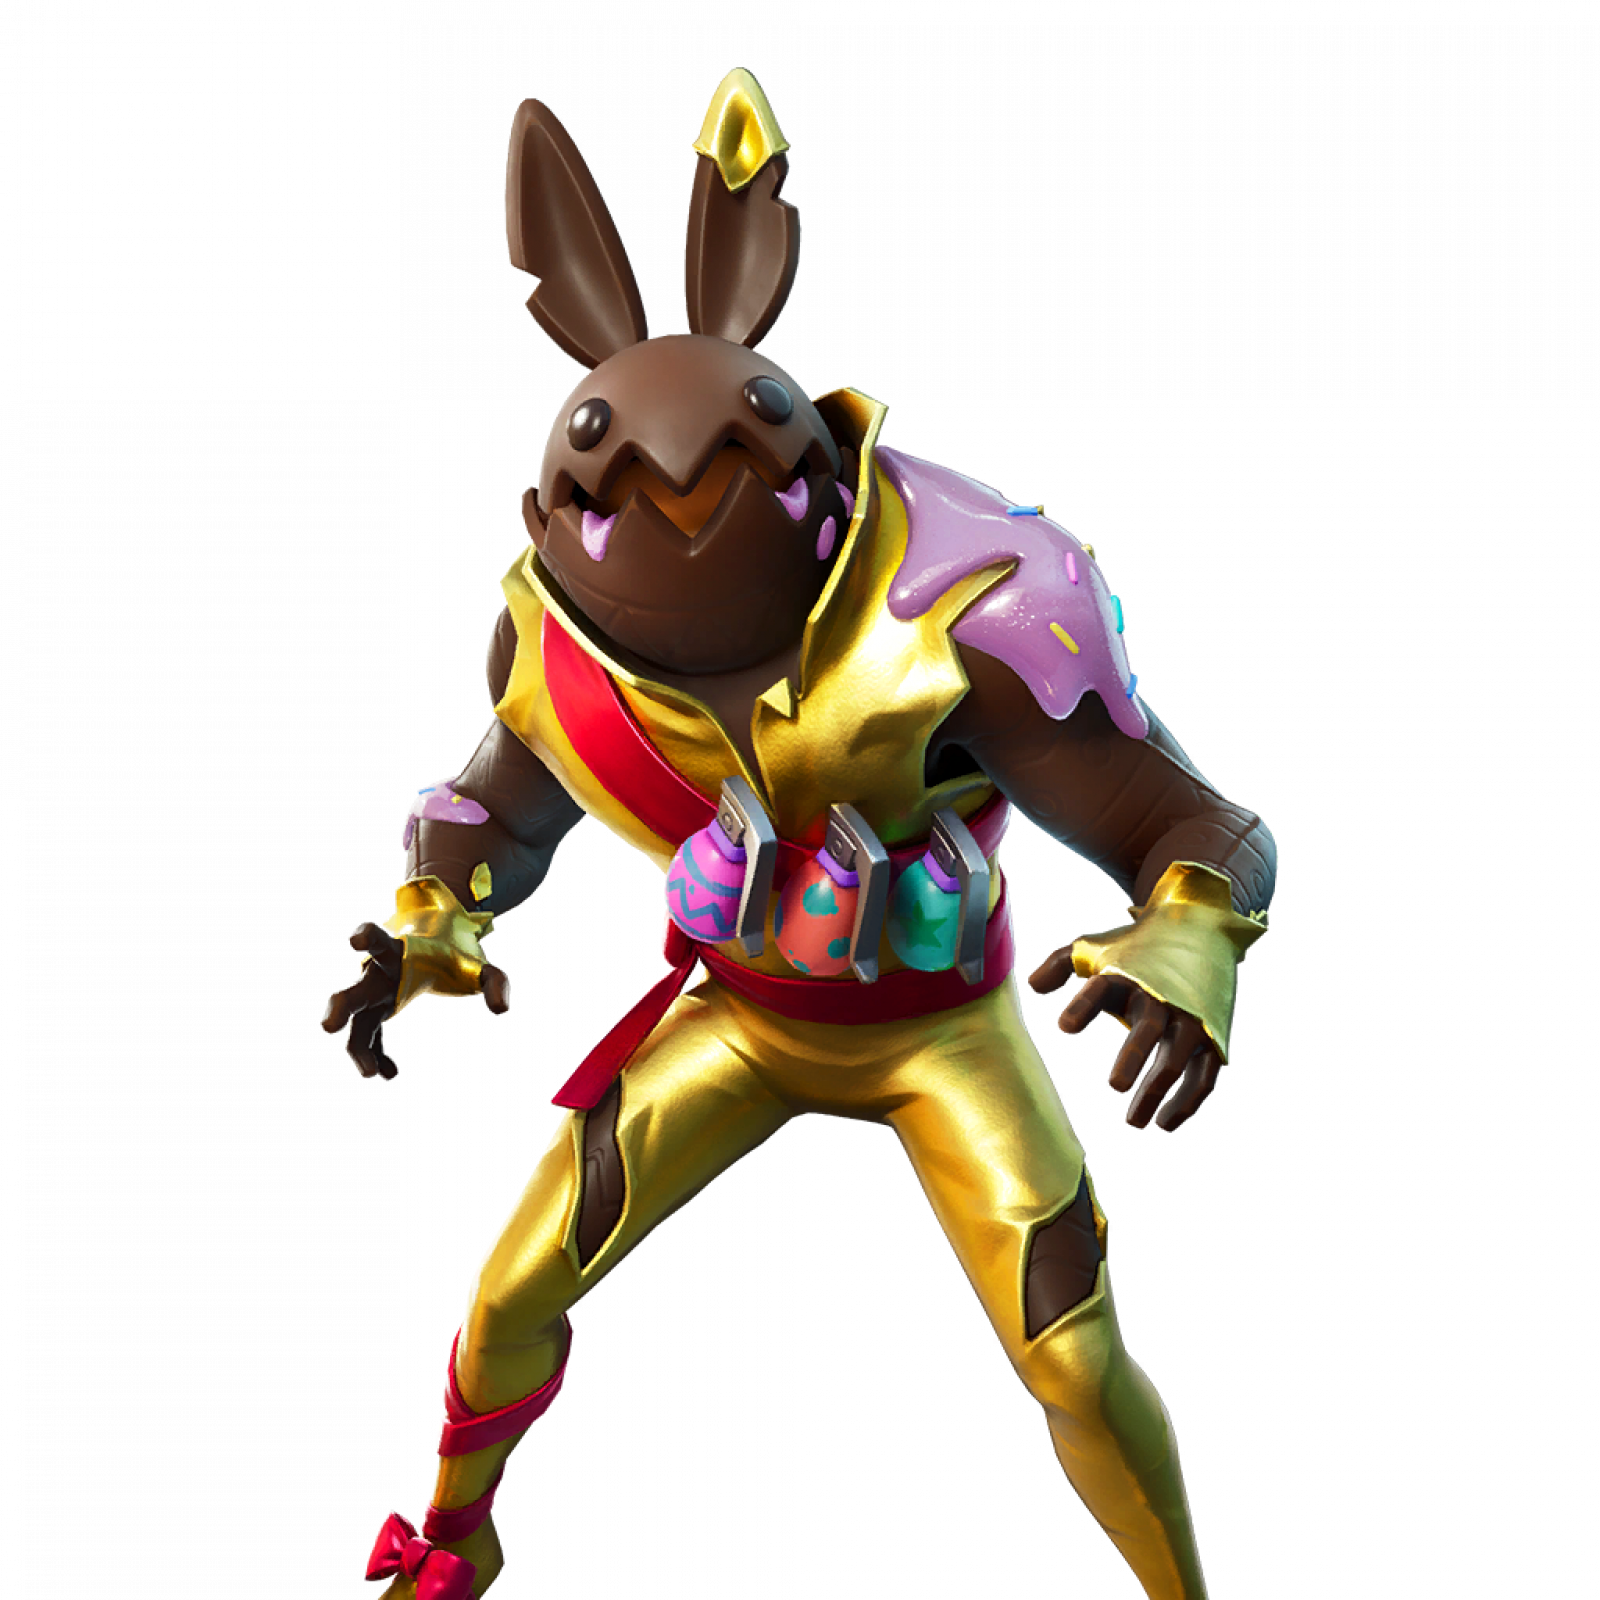 Fortnite' v12.30 Leaked Skins: Celebrate Easter With a Chocolate